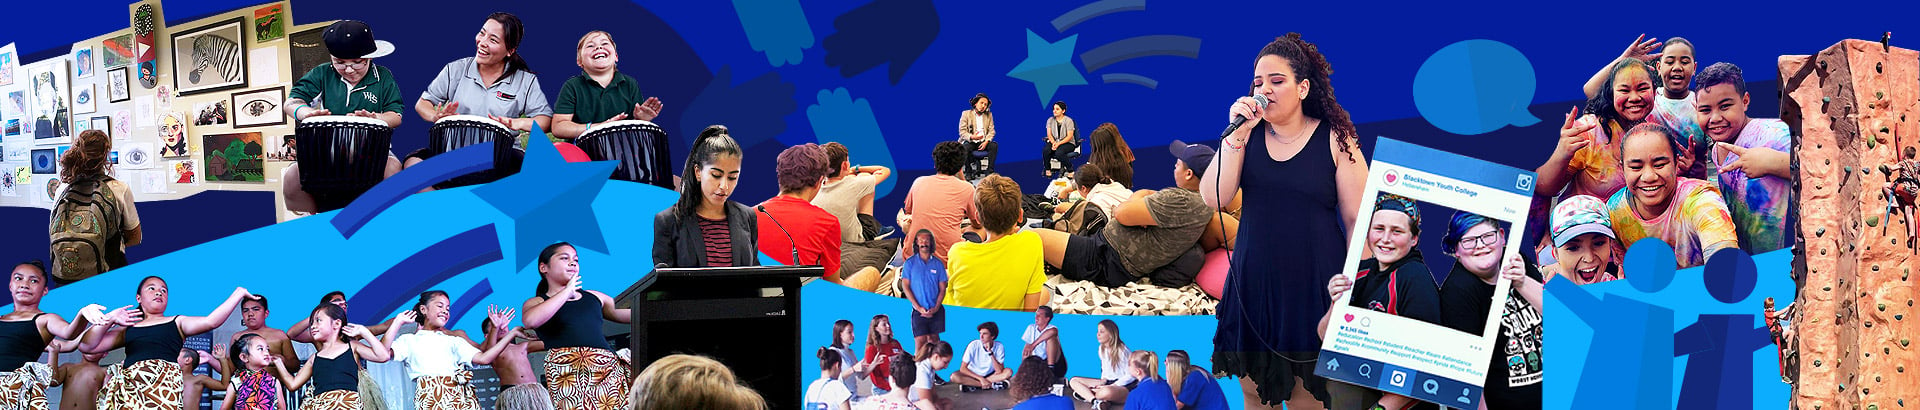 NSW-Youth-Week-2019-web-banner